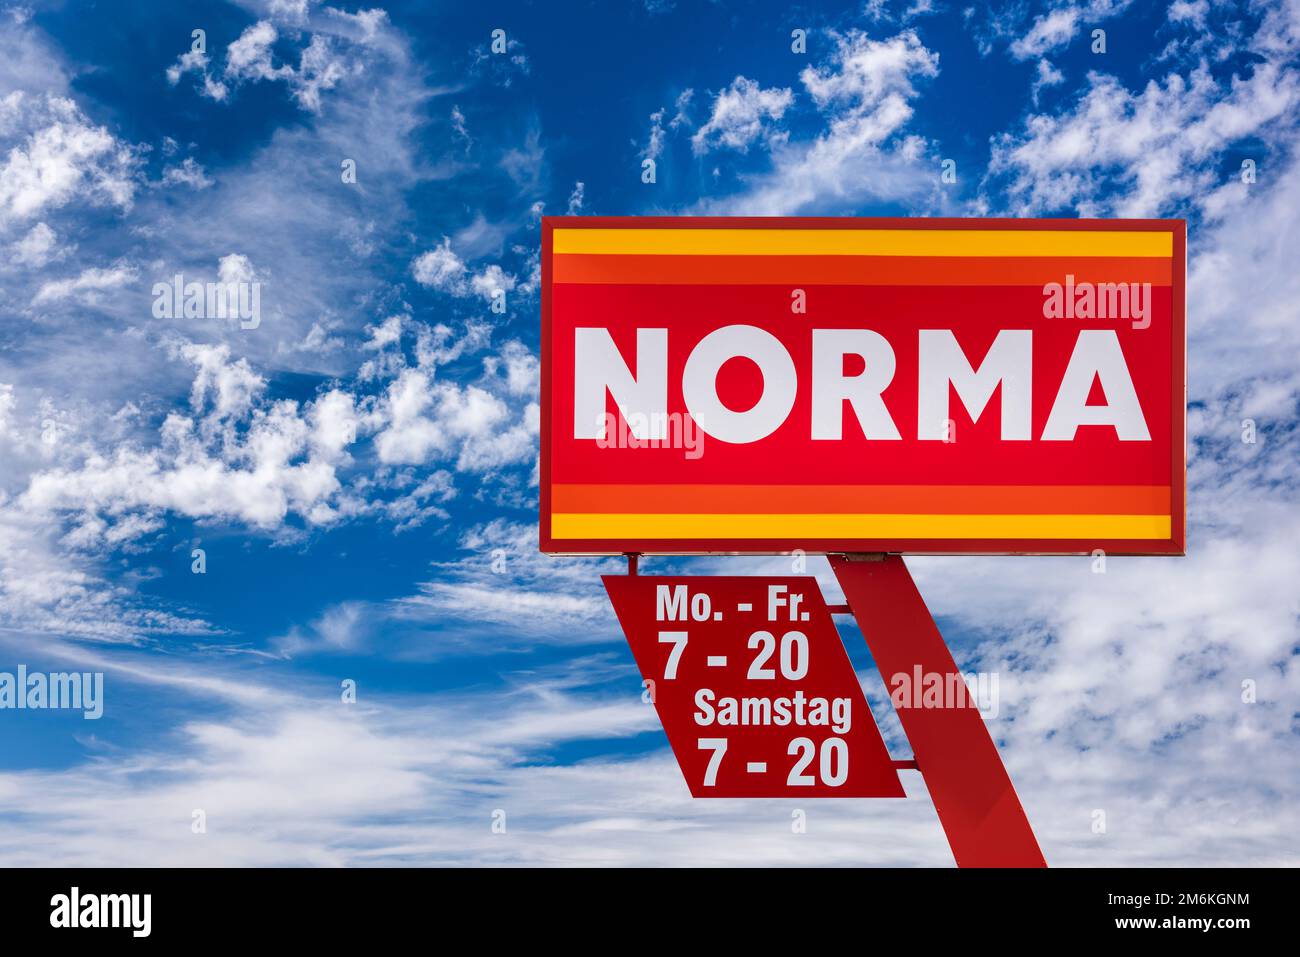 Company sign and logo of the discounter NORMA Stock Photo